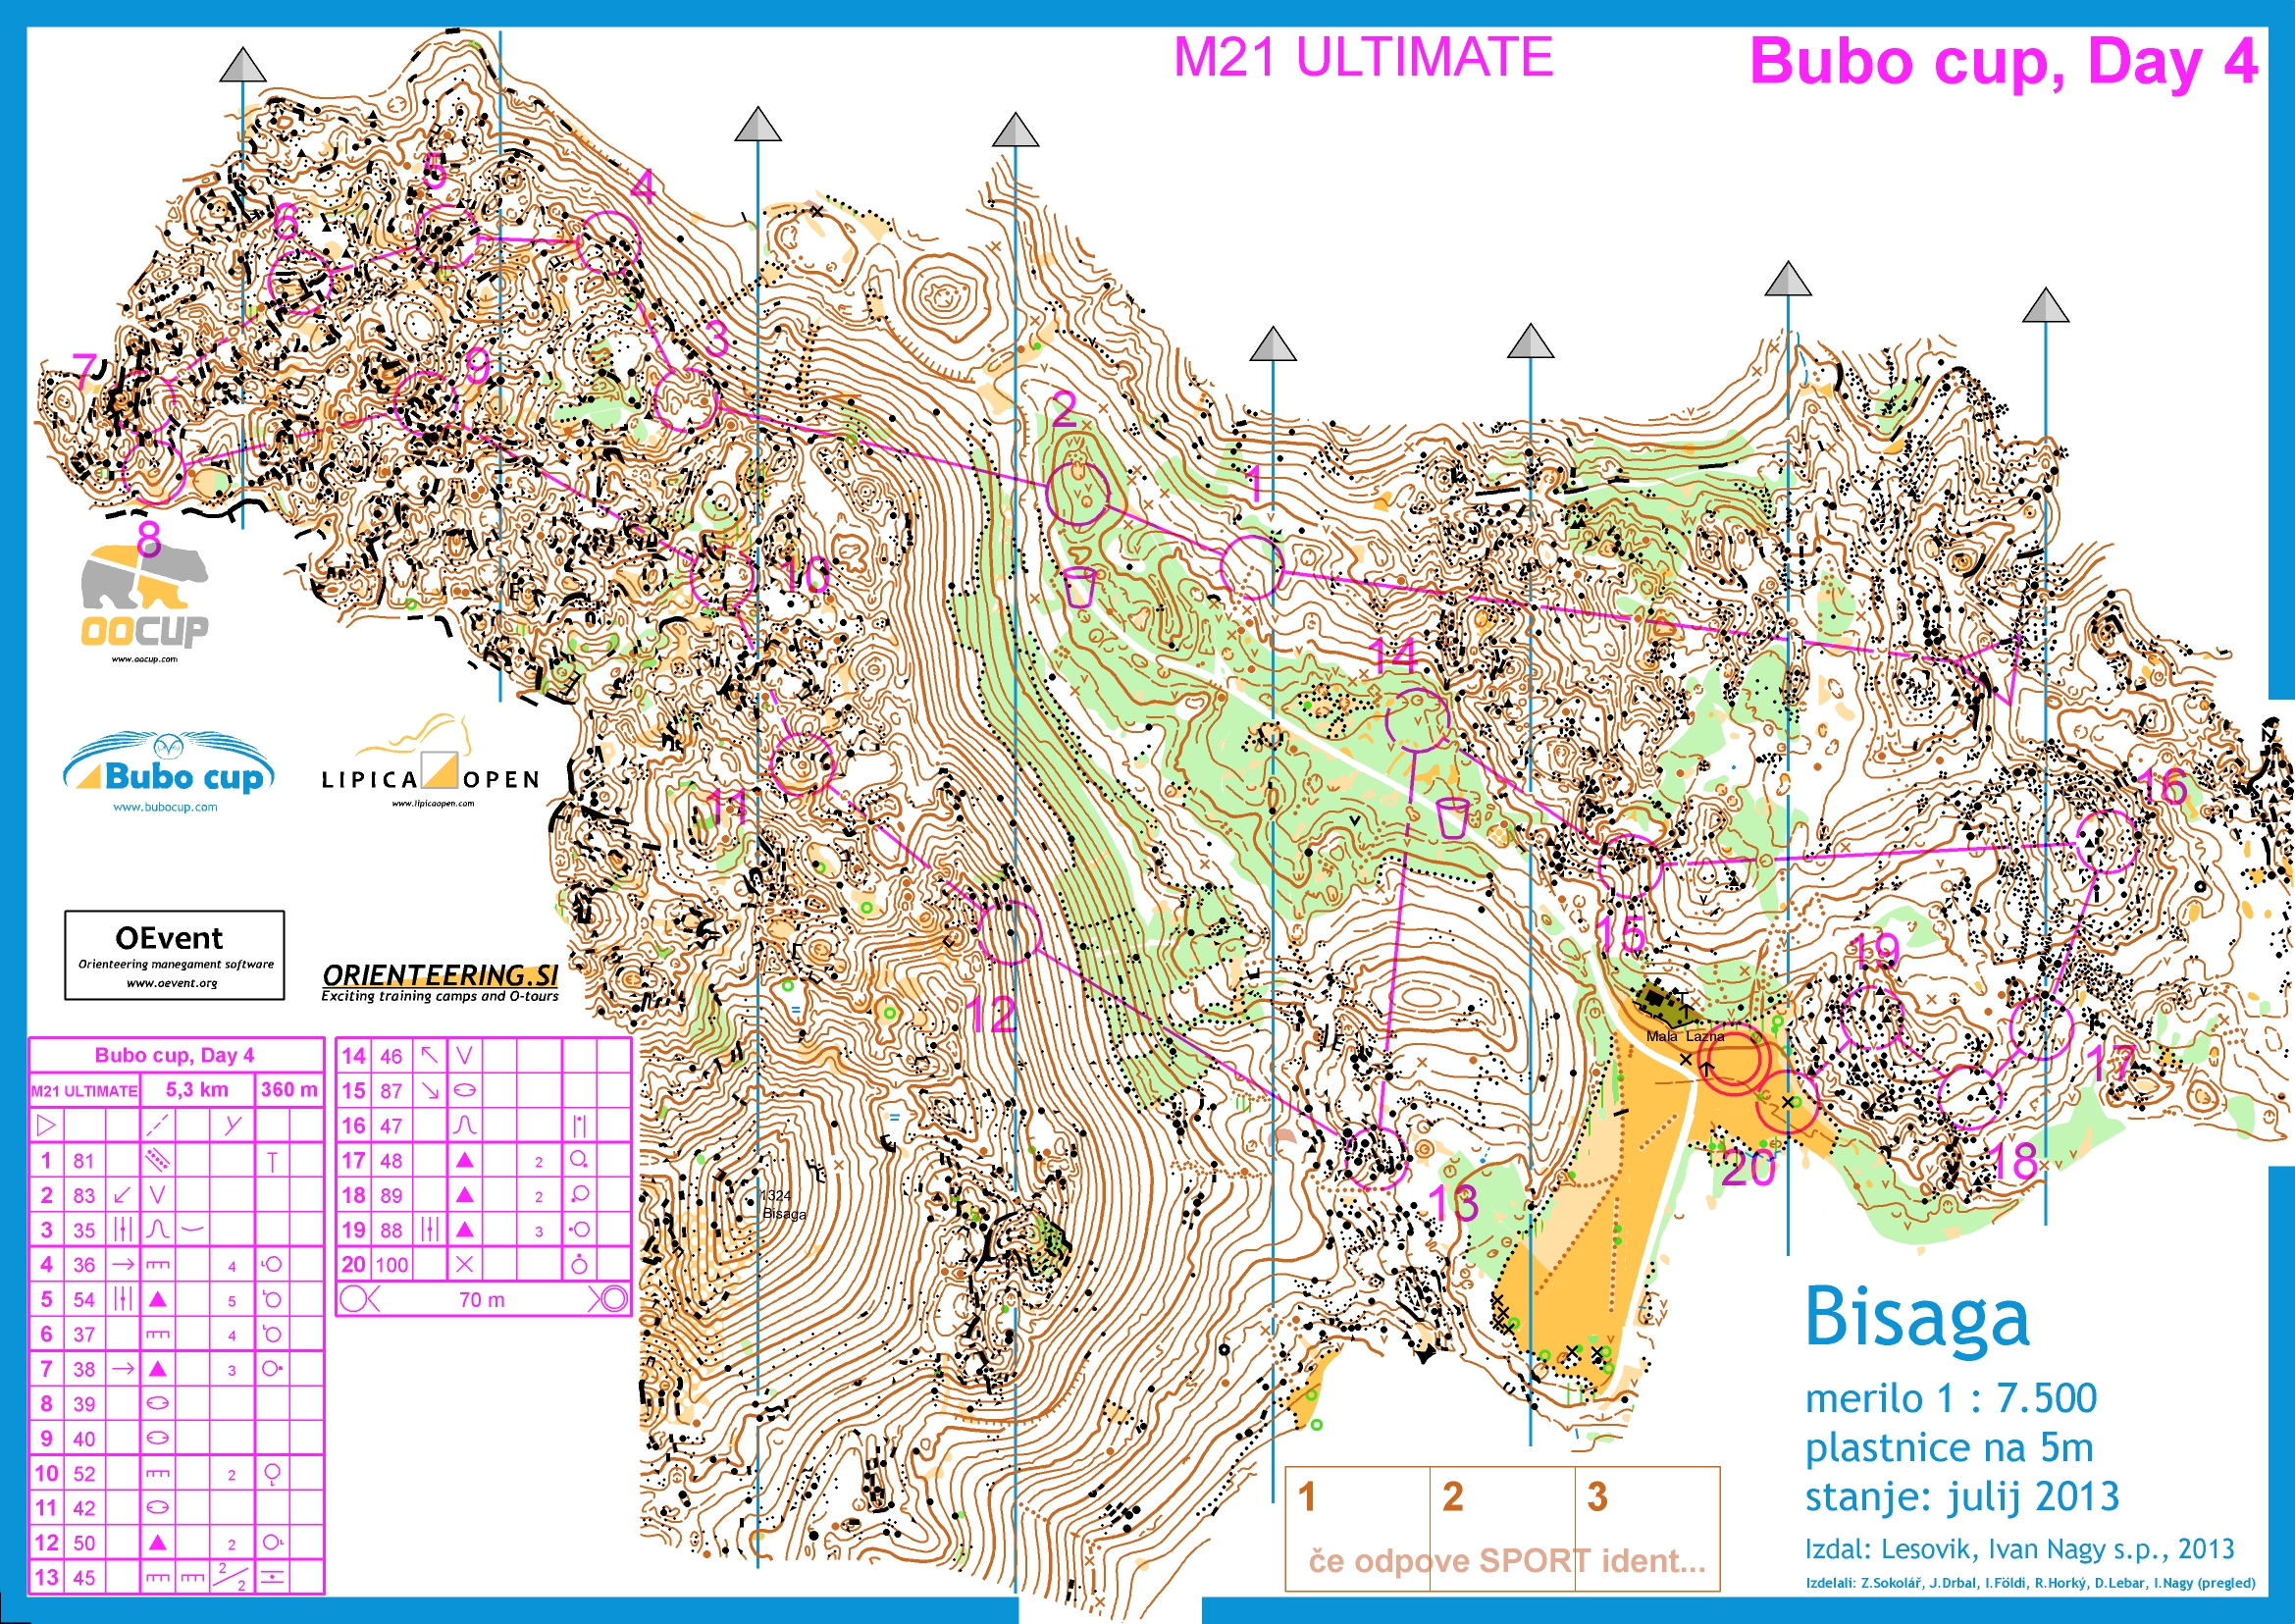 Bubo cup, Stage 4 M21 ULTIMATE (19.07.2013)